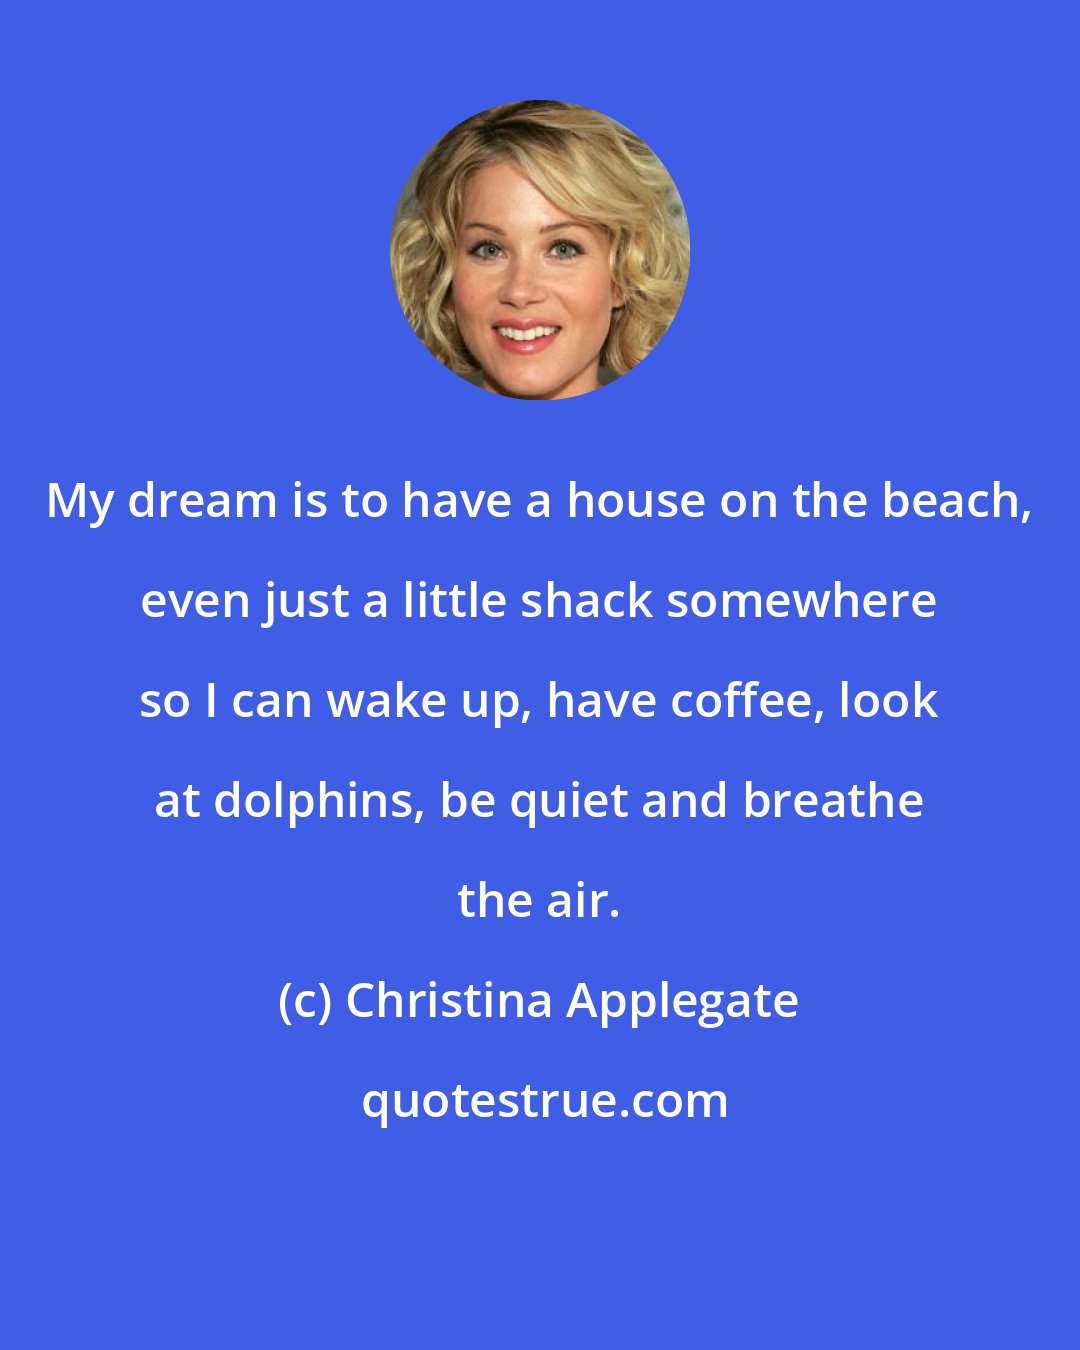 Christina Applegate: My dream is to have a house on the beach, even just a little shack somewhere so I can wake up, have coffee, look at dolphins, be quiet and breathe the air.